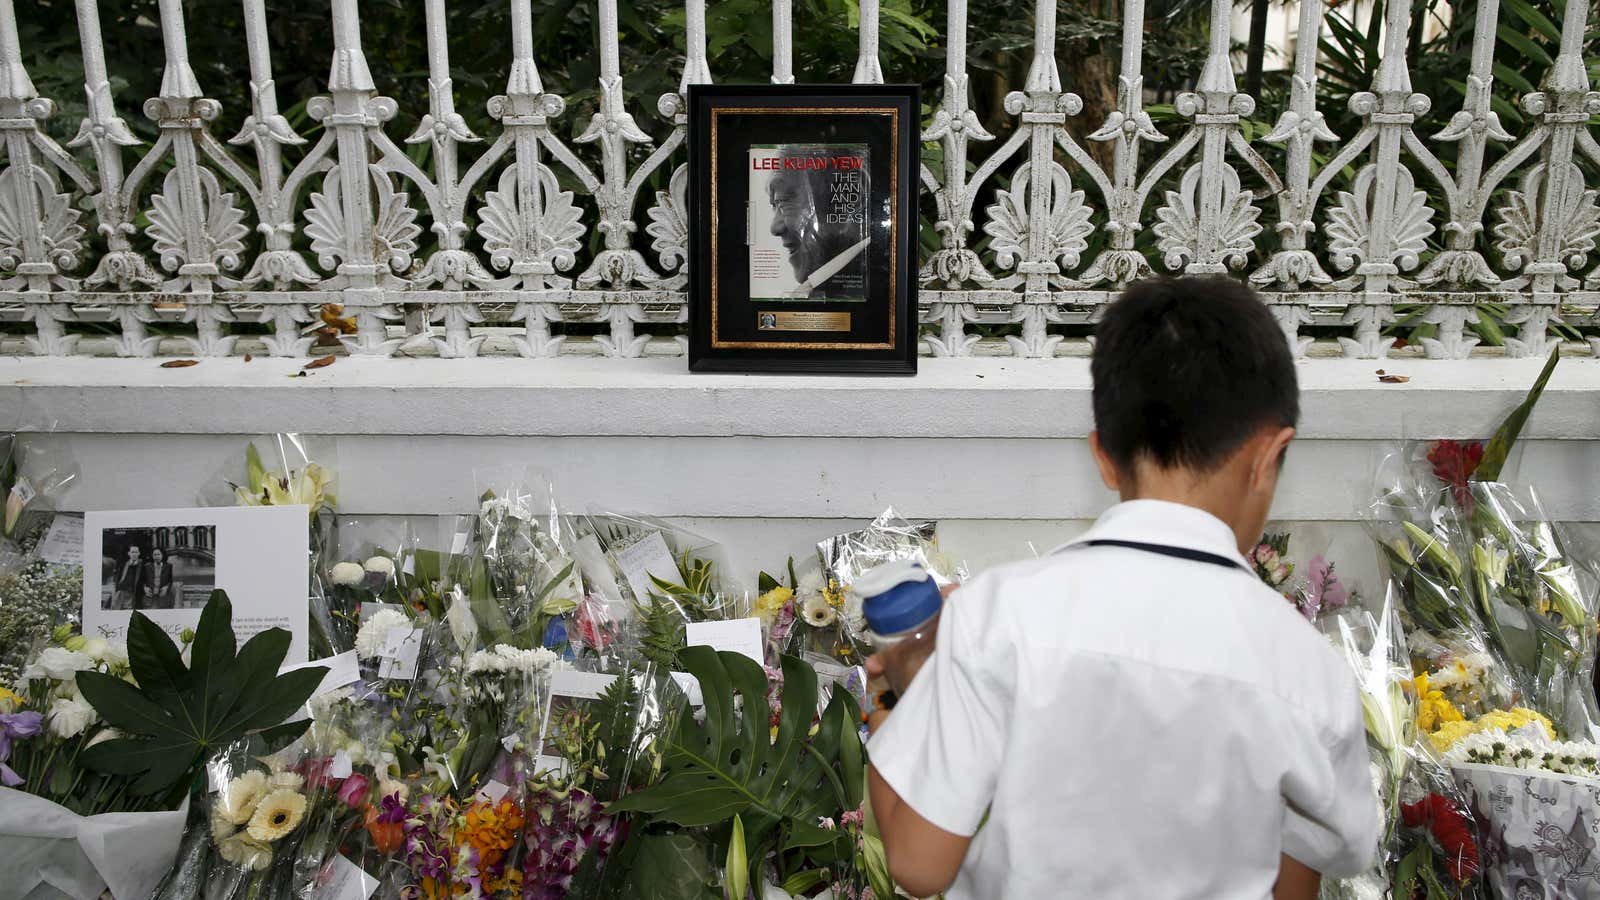 A funeral for former prime minister Lee Kuan Yew will be held on March 29.